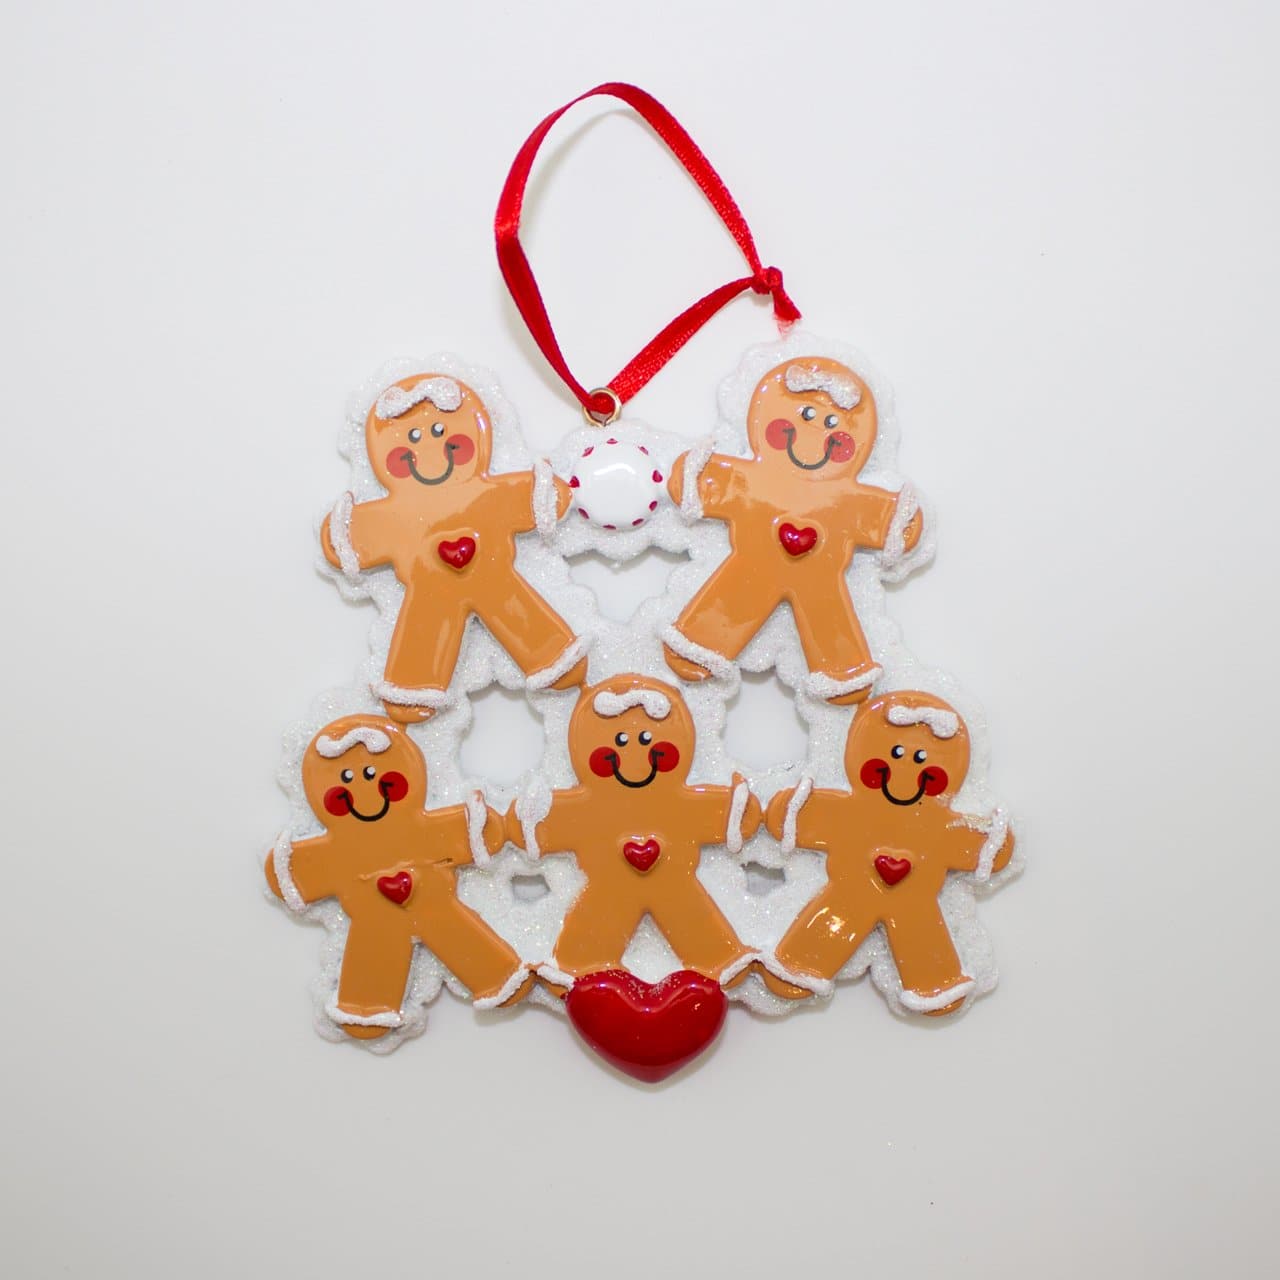 Gingerbread Man Heart - Christmas Ornament (Suitable for Personalization)